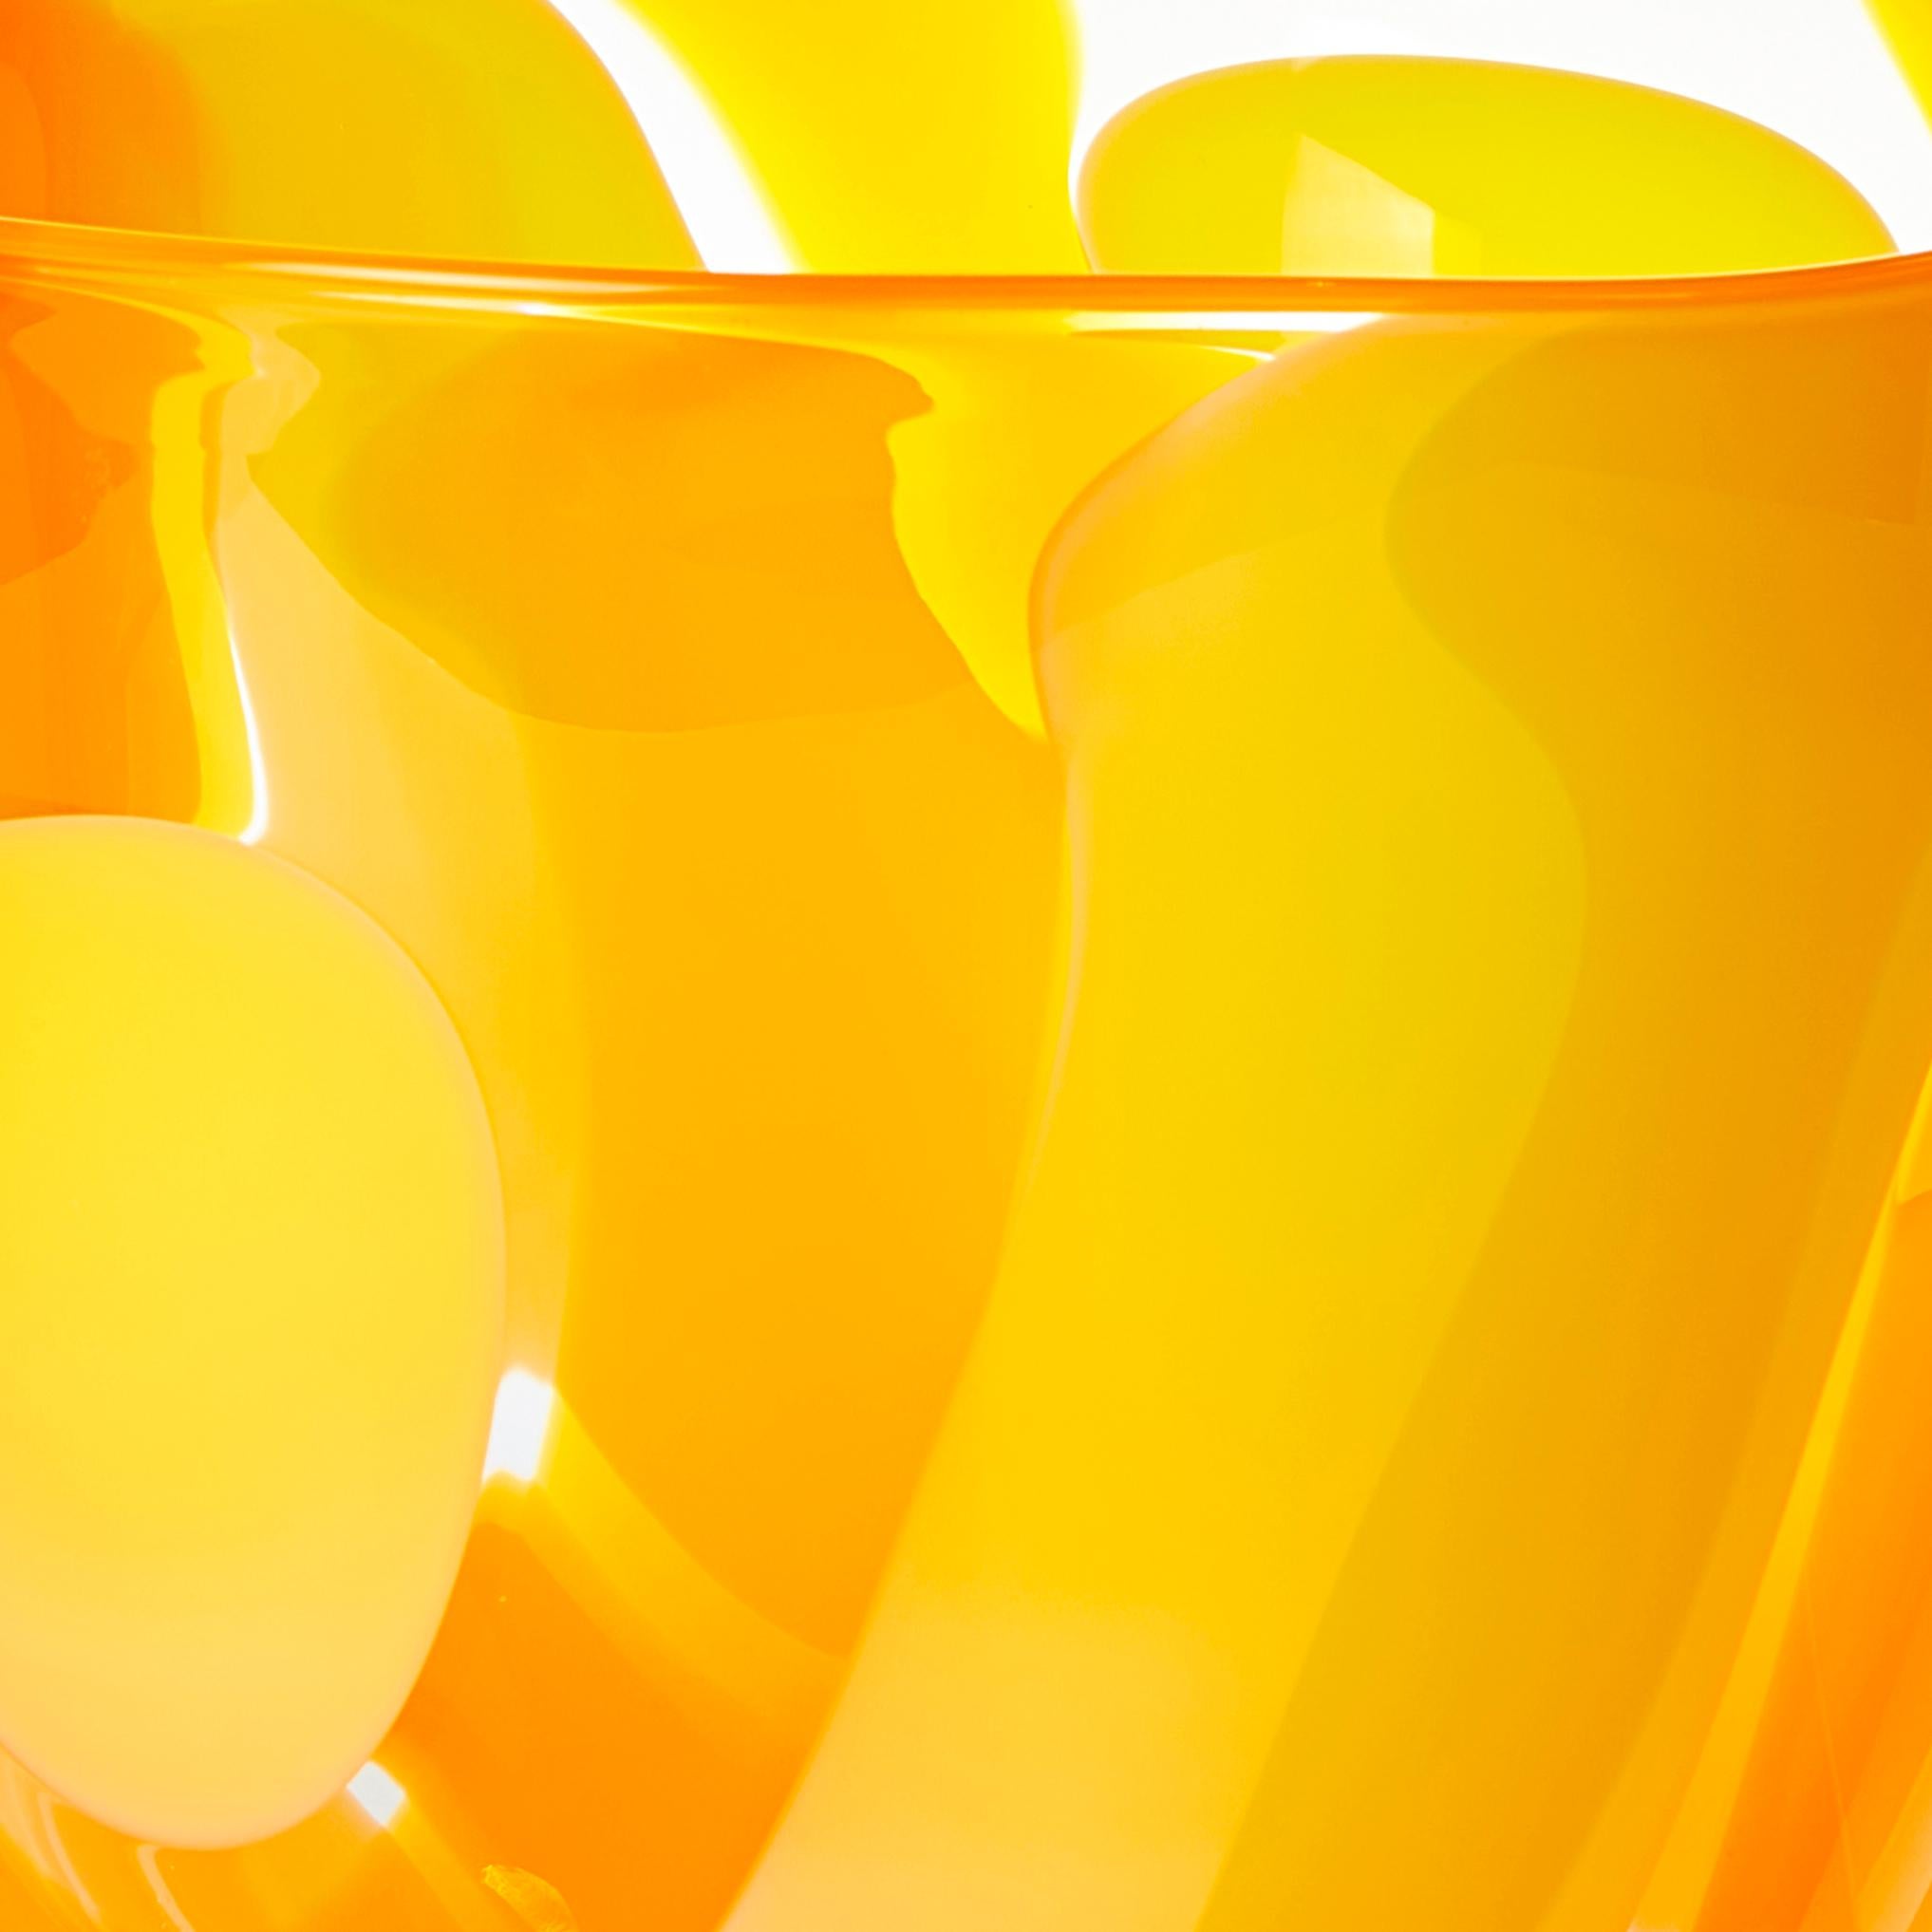 British Waves in Yellow and Orange, a Unique Glass Bowl / Centrepiece by Neil Wilkin 